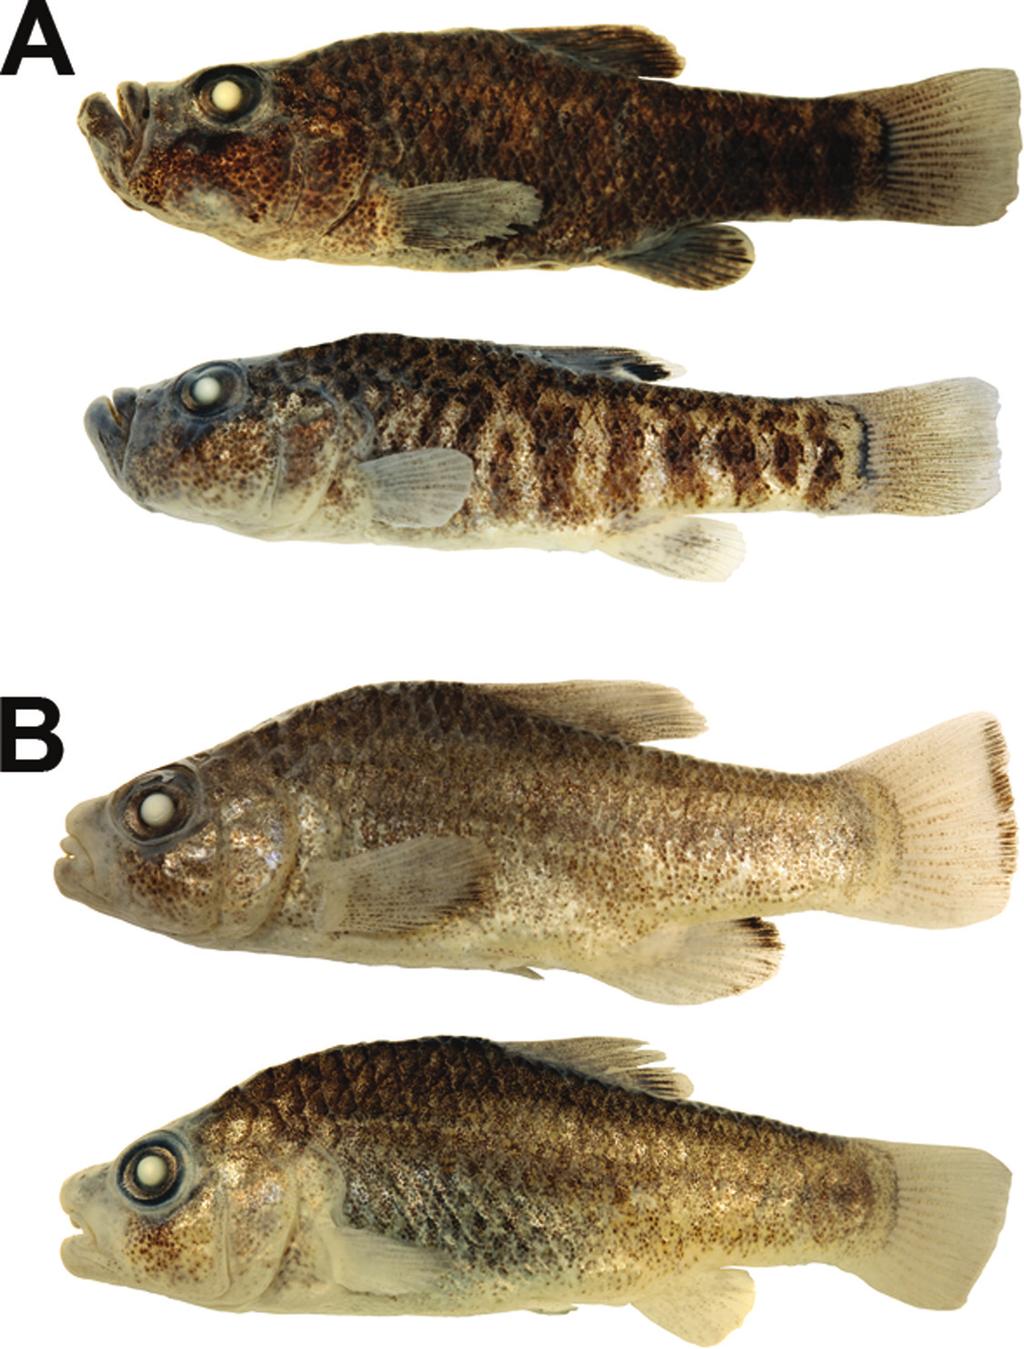 A Remarkable Species Flock of Cyprinodon Pupfishes Martin and Wainwright 233 evolution in allopatric Cyprinodon species (Martin and Wainwright 2011).